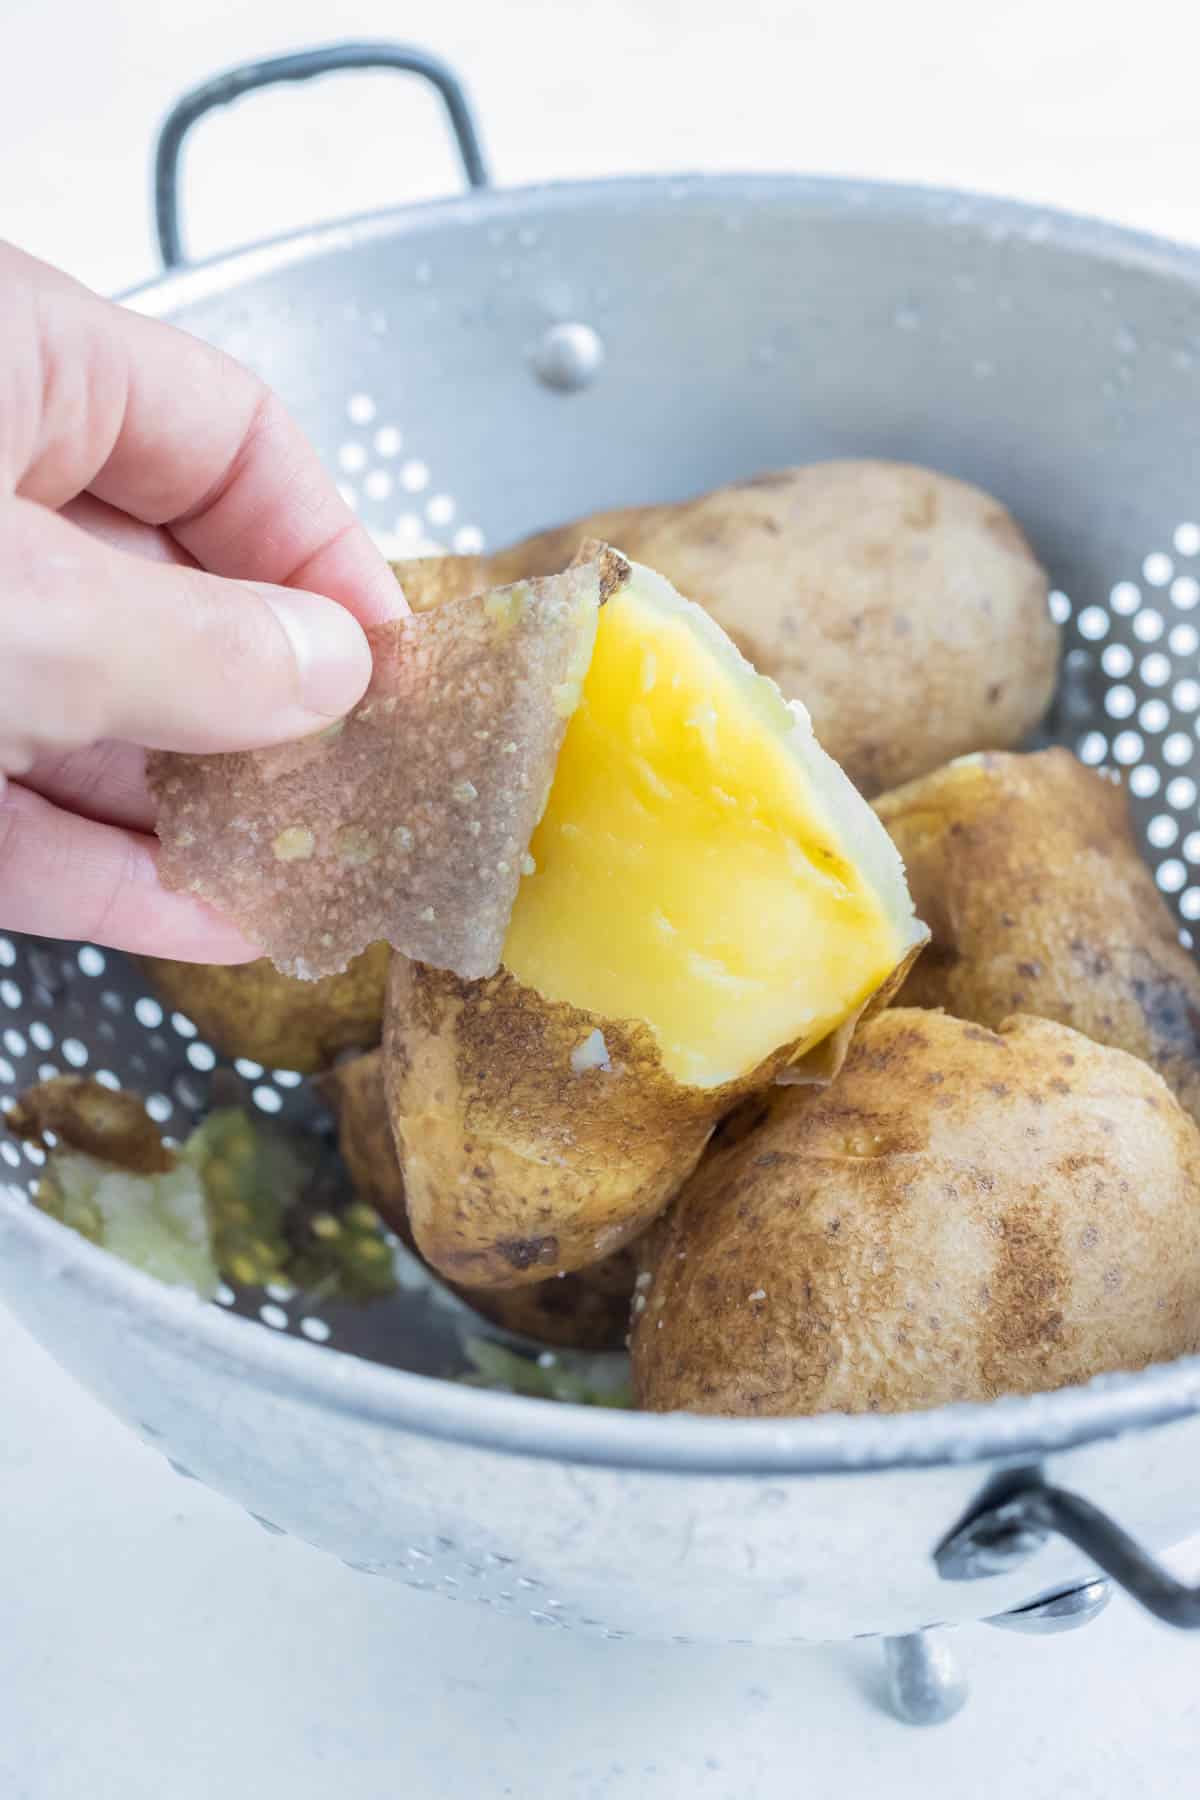 It is easy to peel potatoes after boiling.